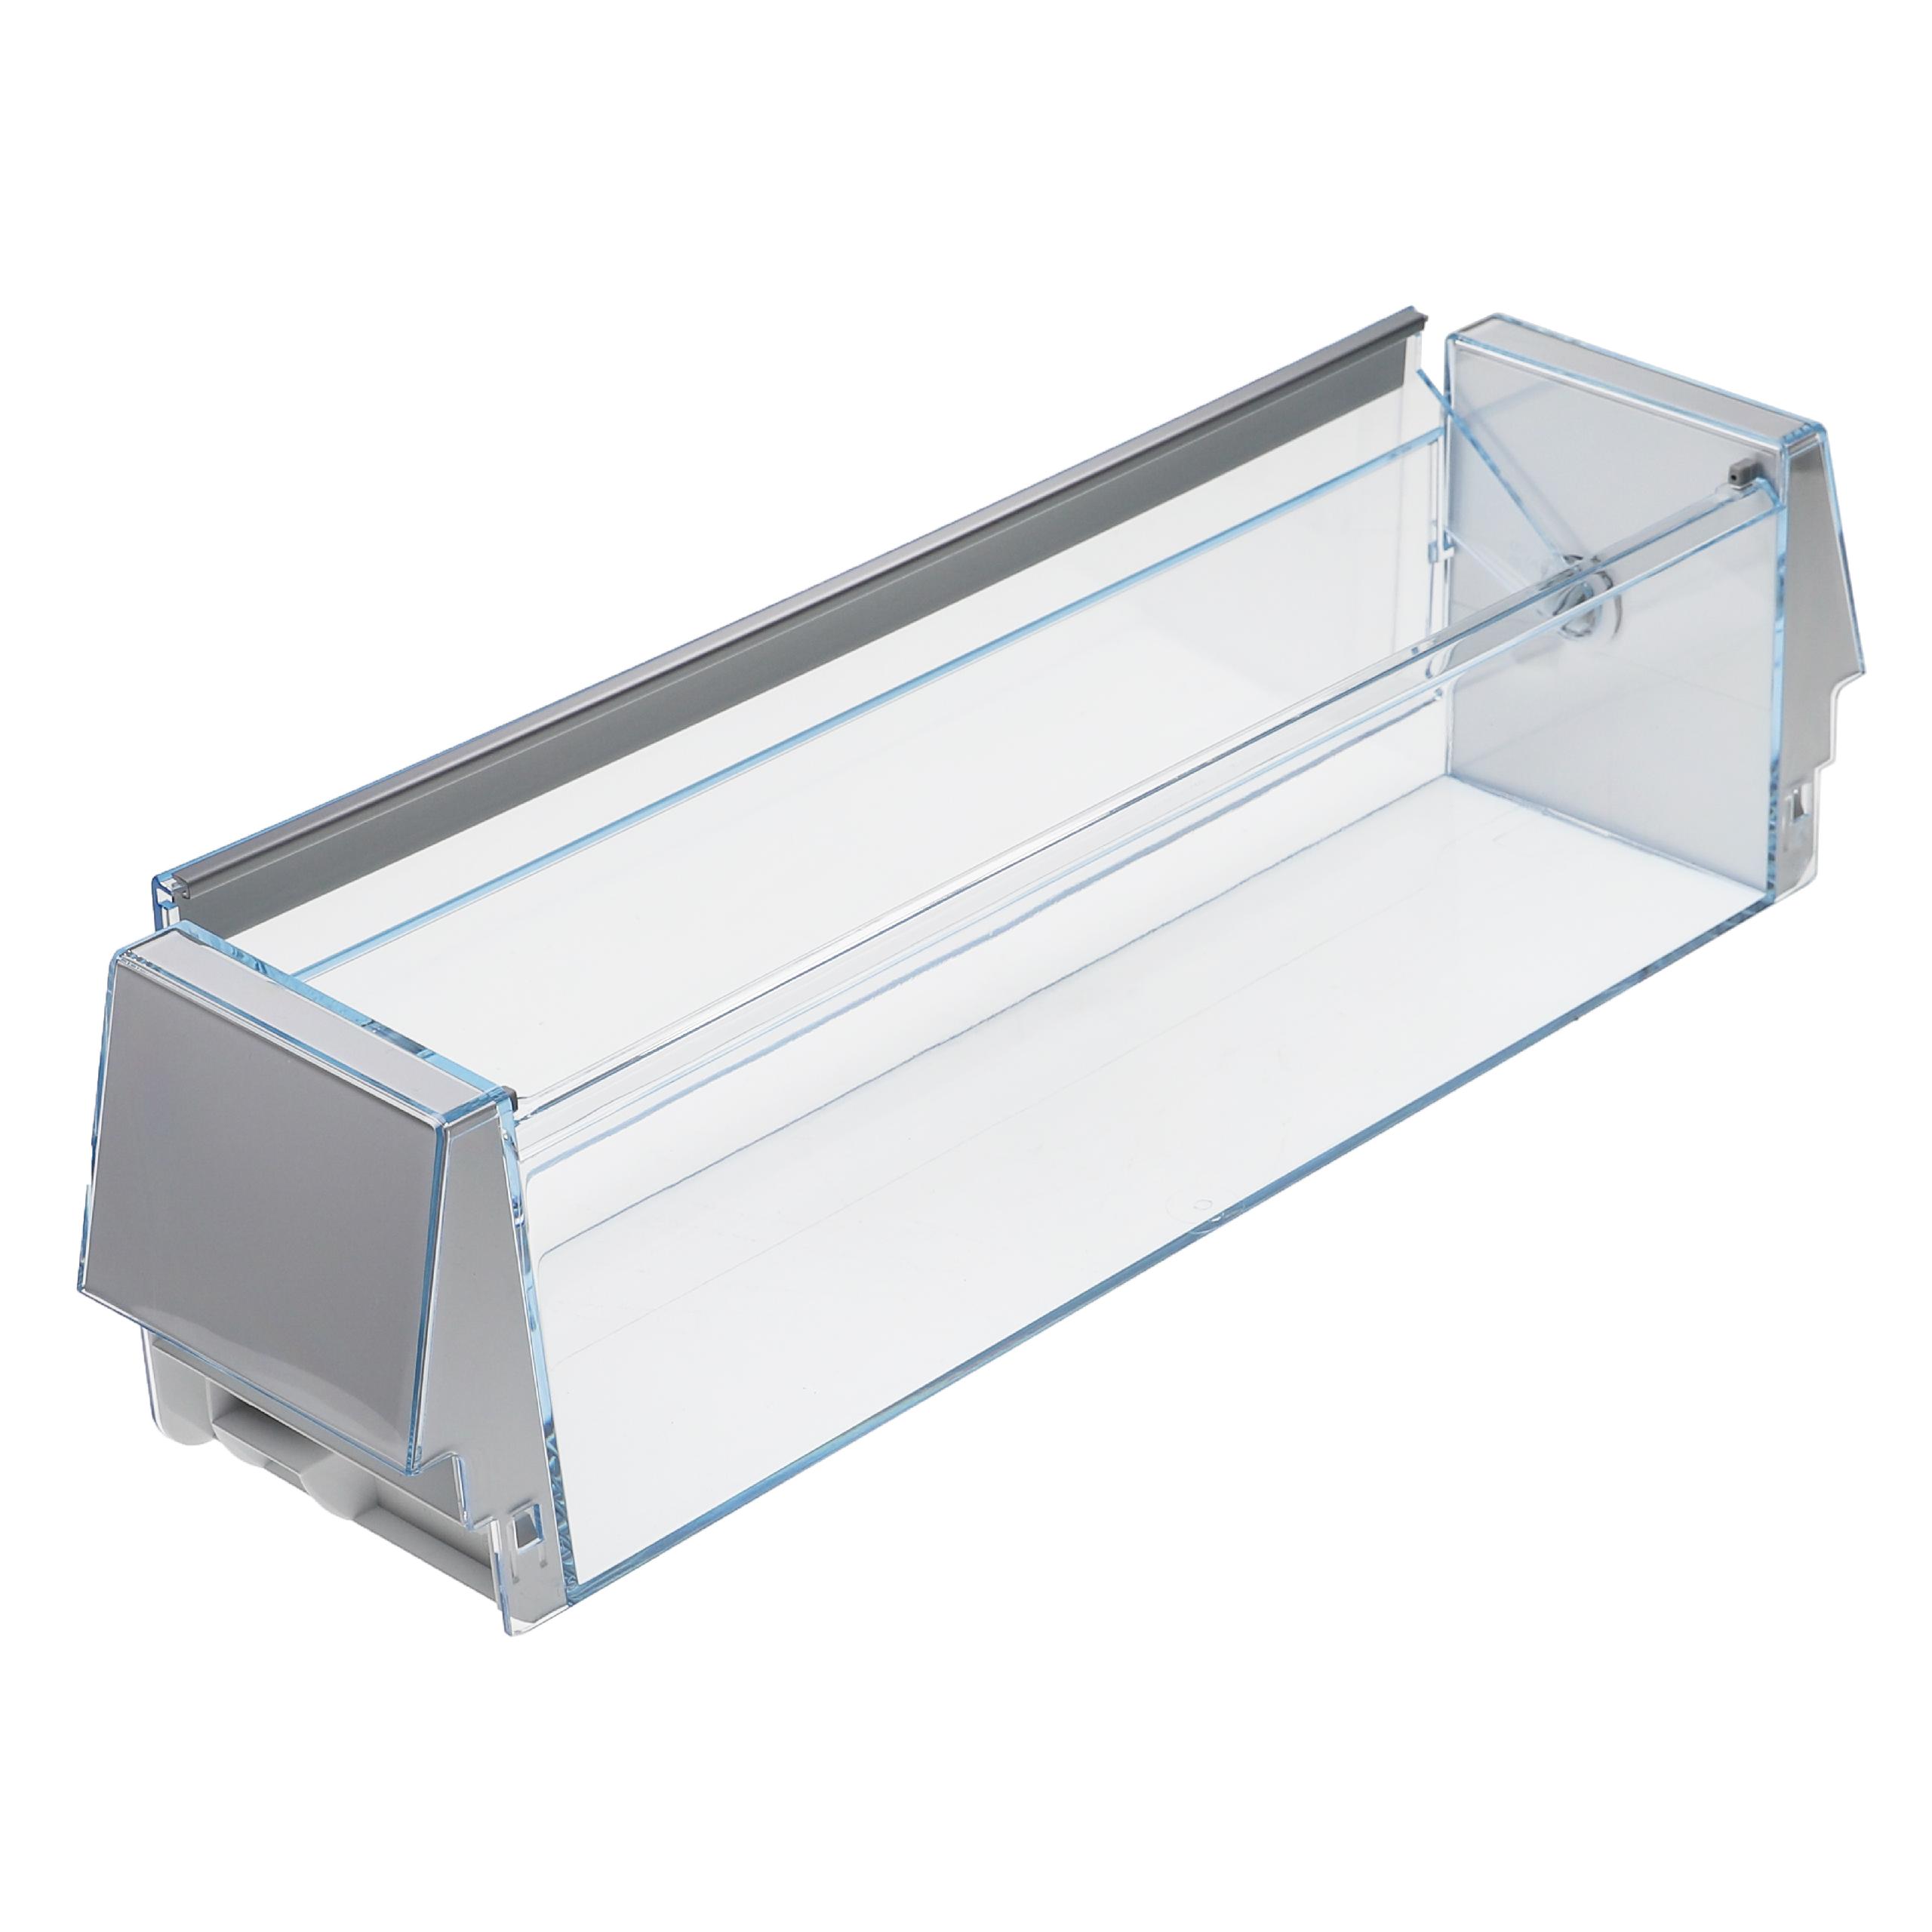 Compartment as Replacement for 704756 for Bosch, Siemens Fridge - Door Tray with Lid